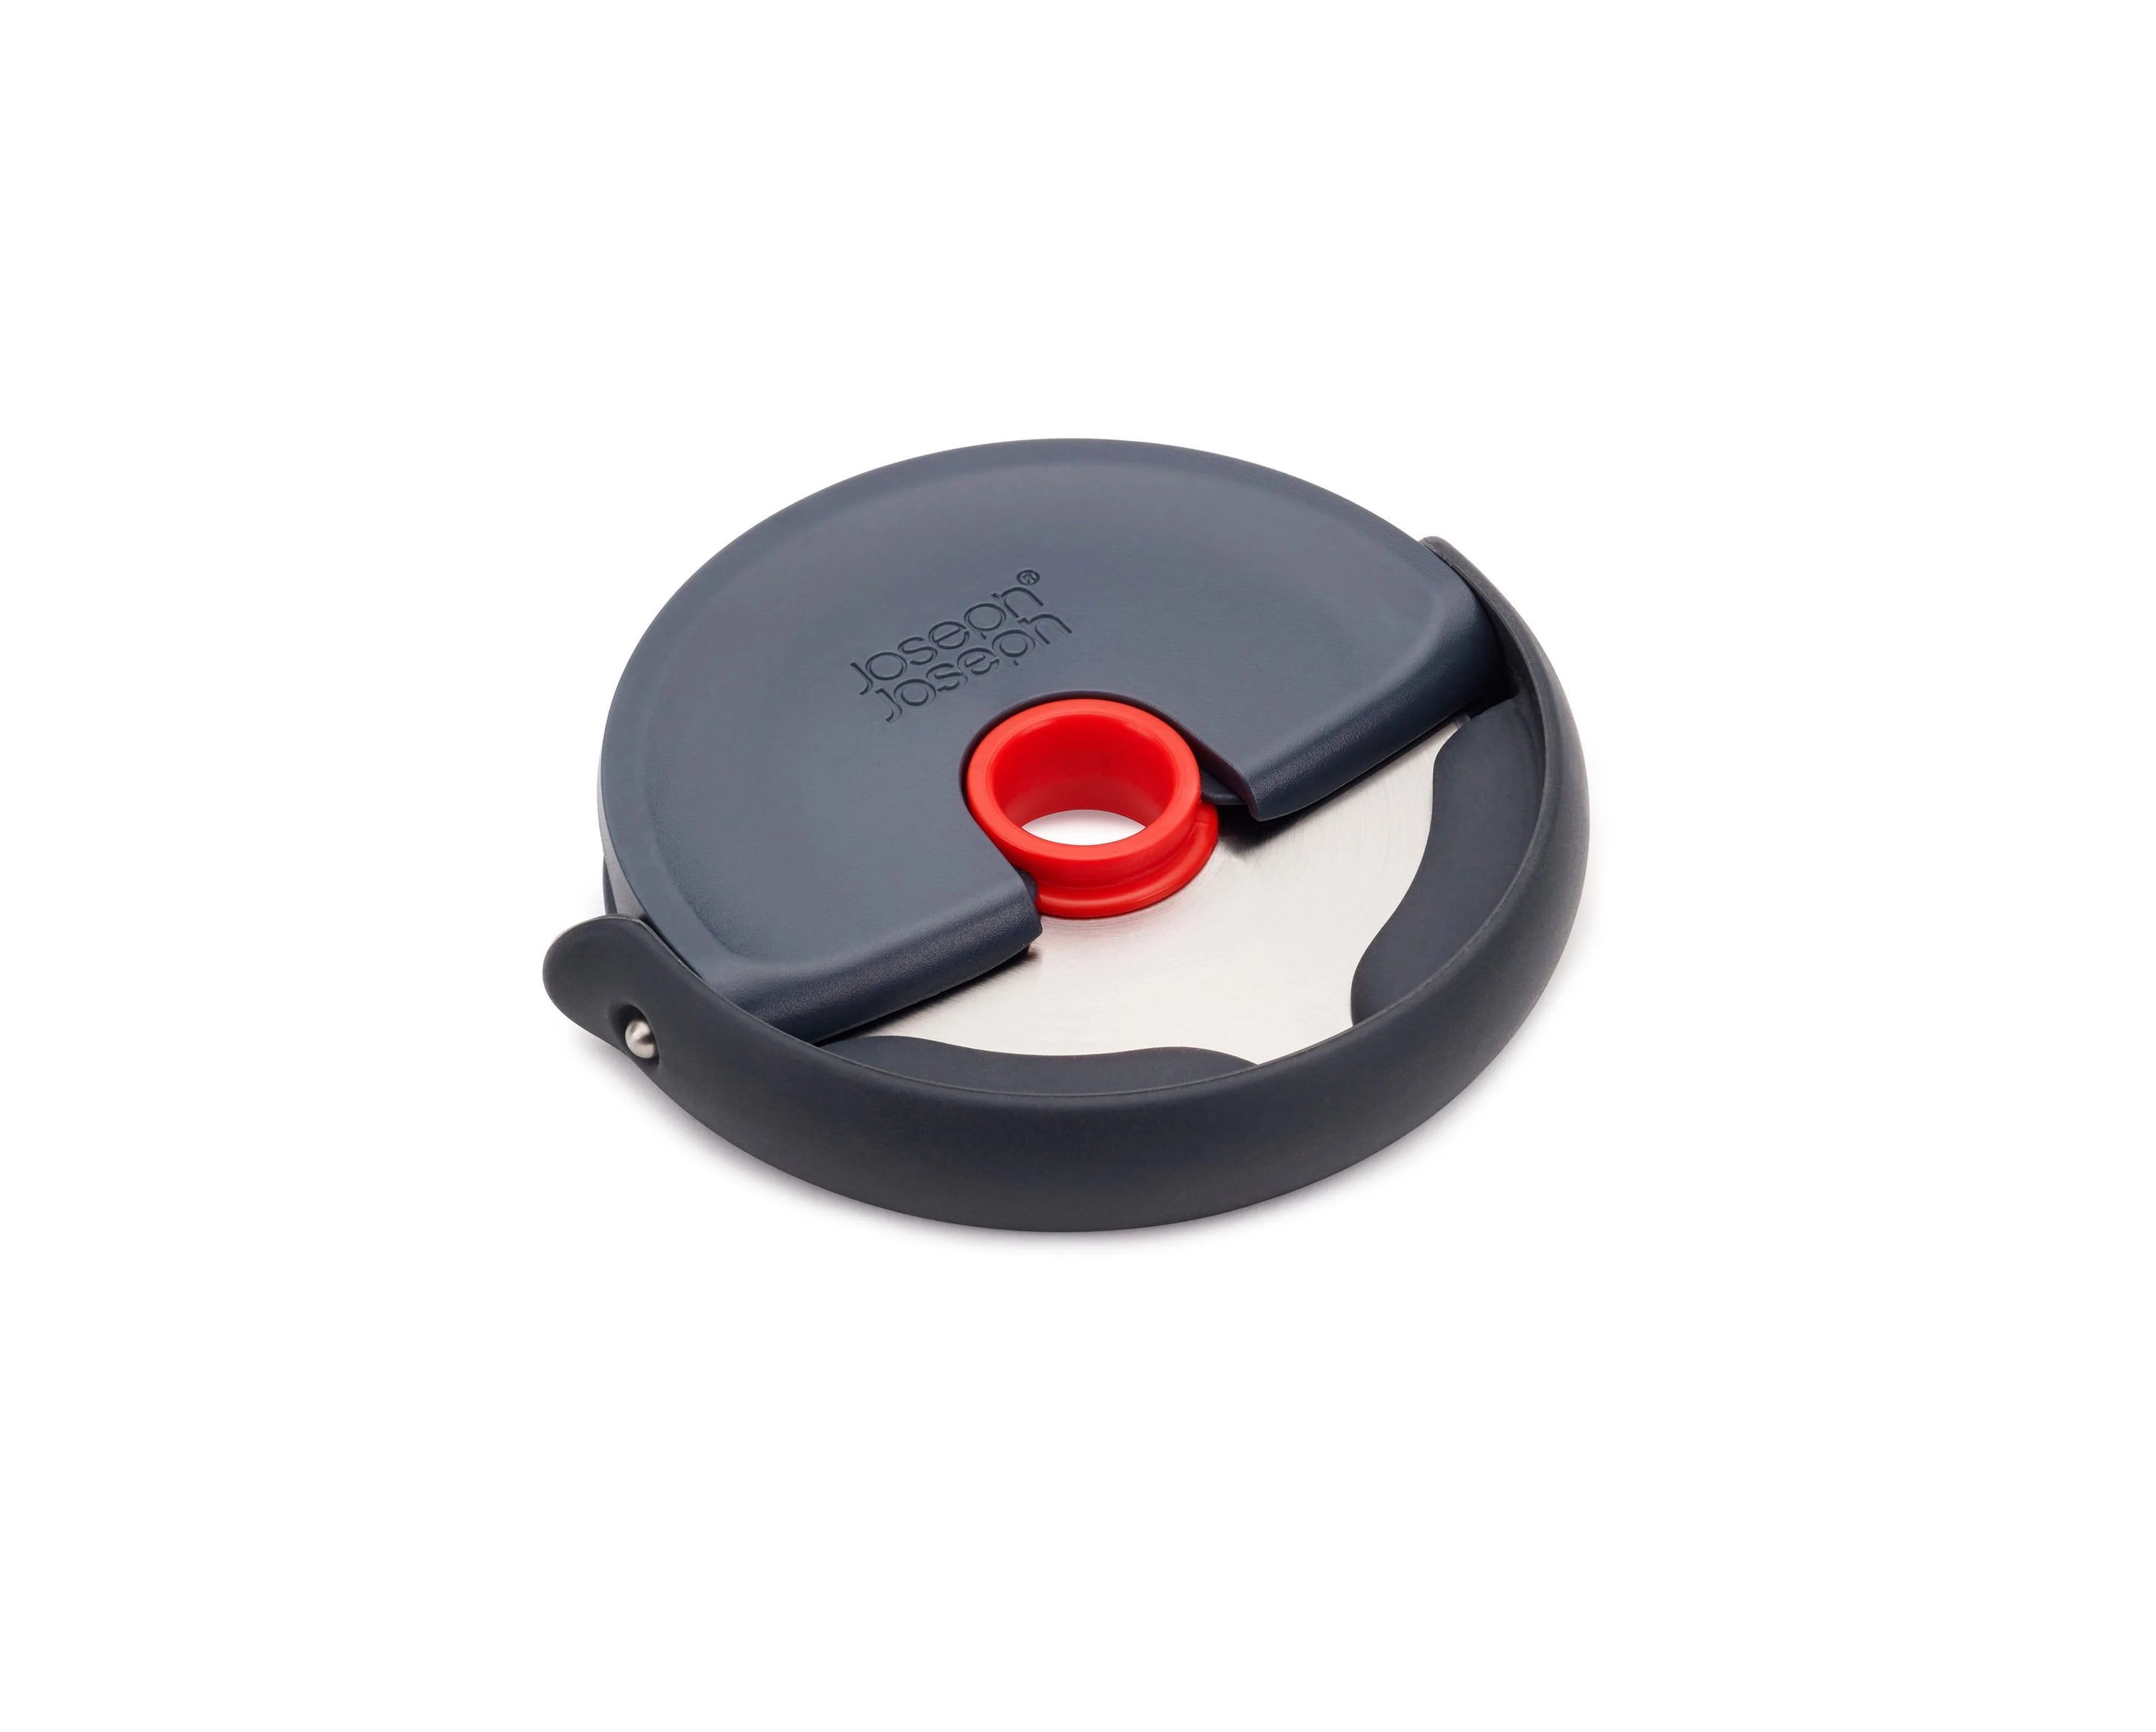 Disc Easy-clean Pizza Cutter